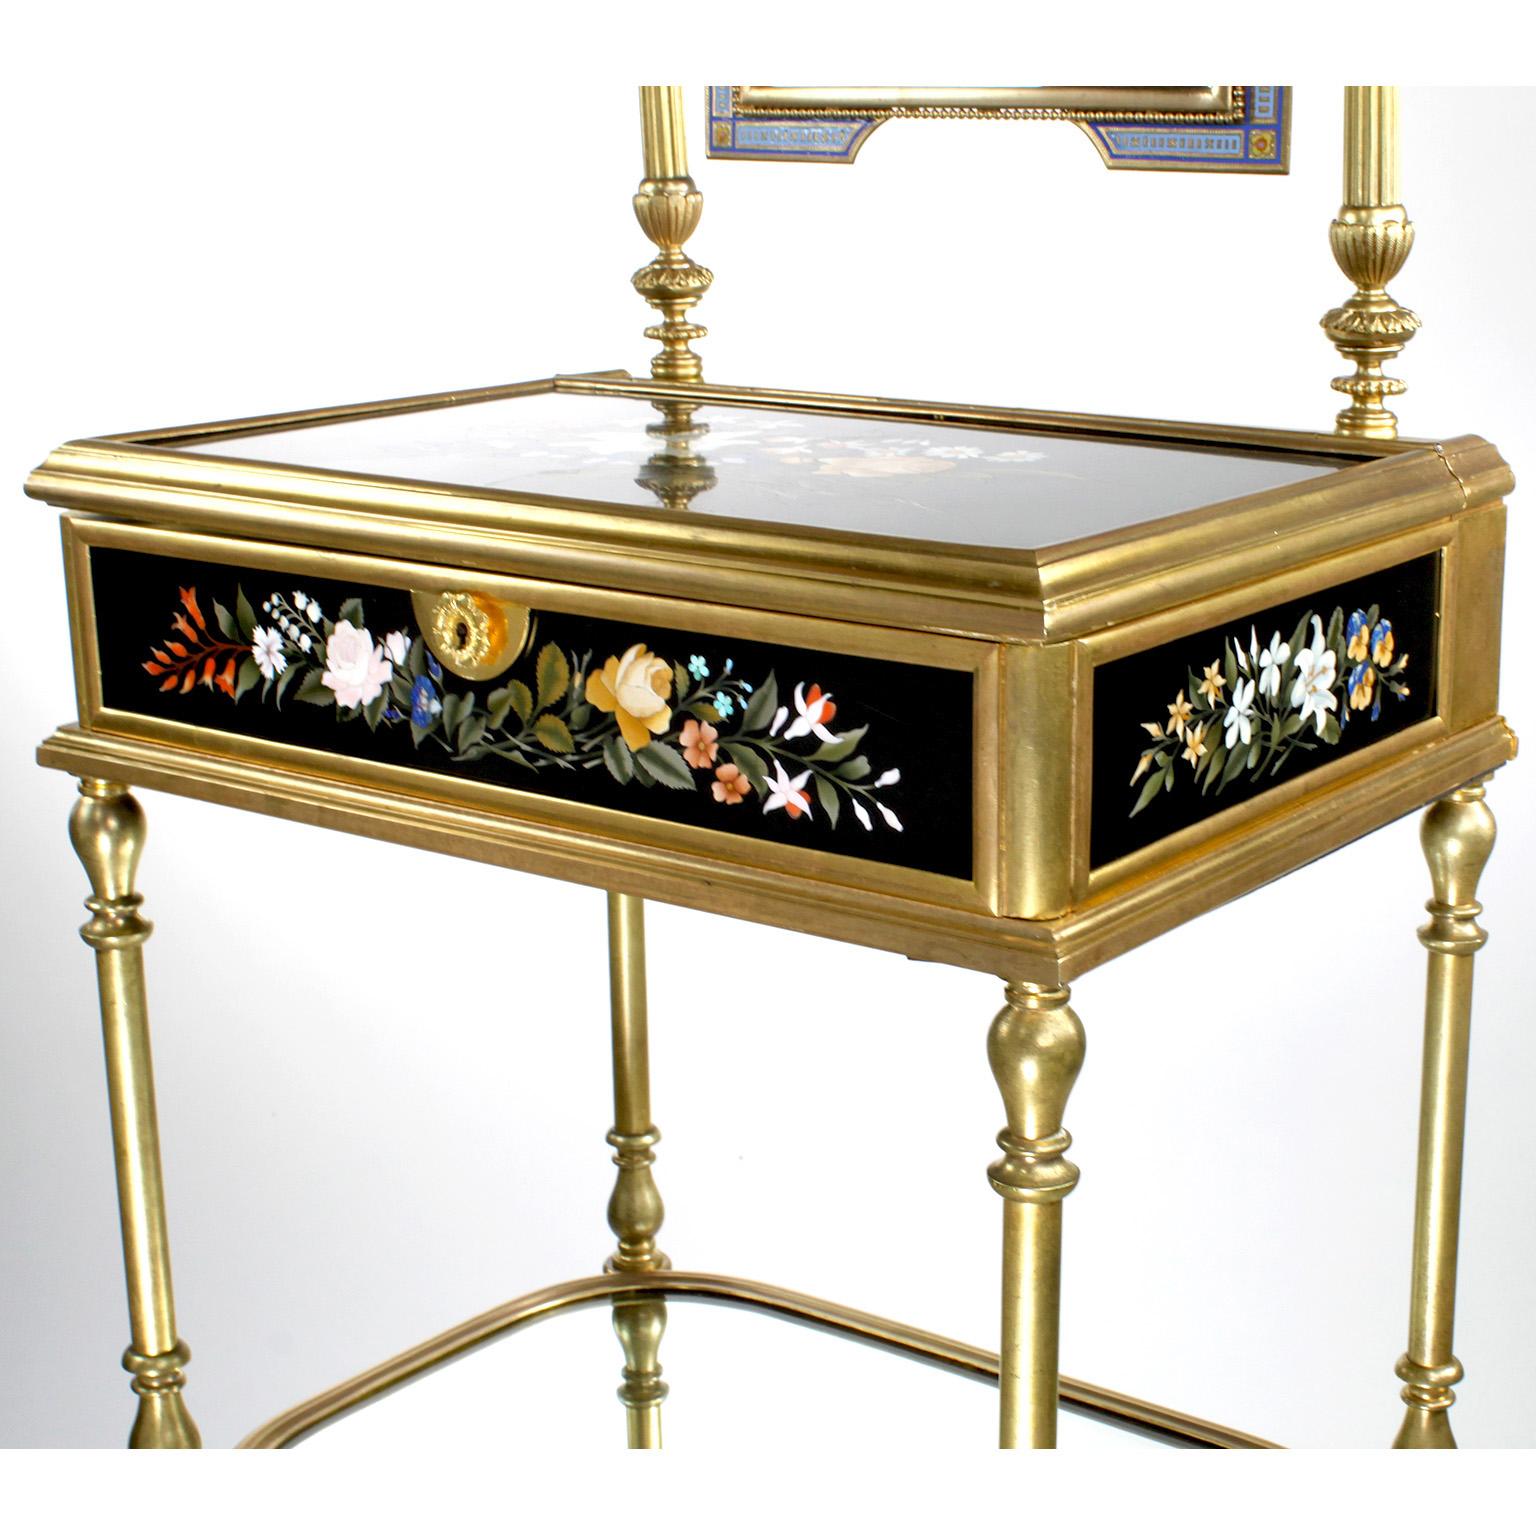 French 19th Century Gilt-Bronze and Pietra Dura Vanity Stand, Attr. Tahan, Paris For Sale 1